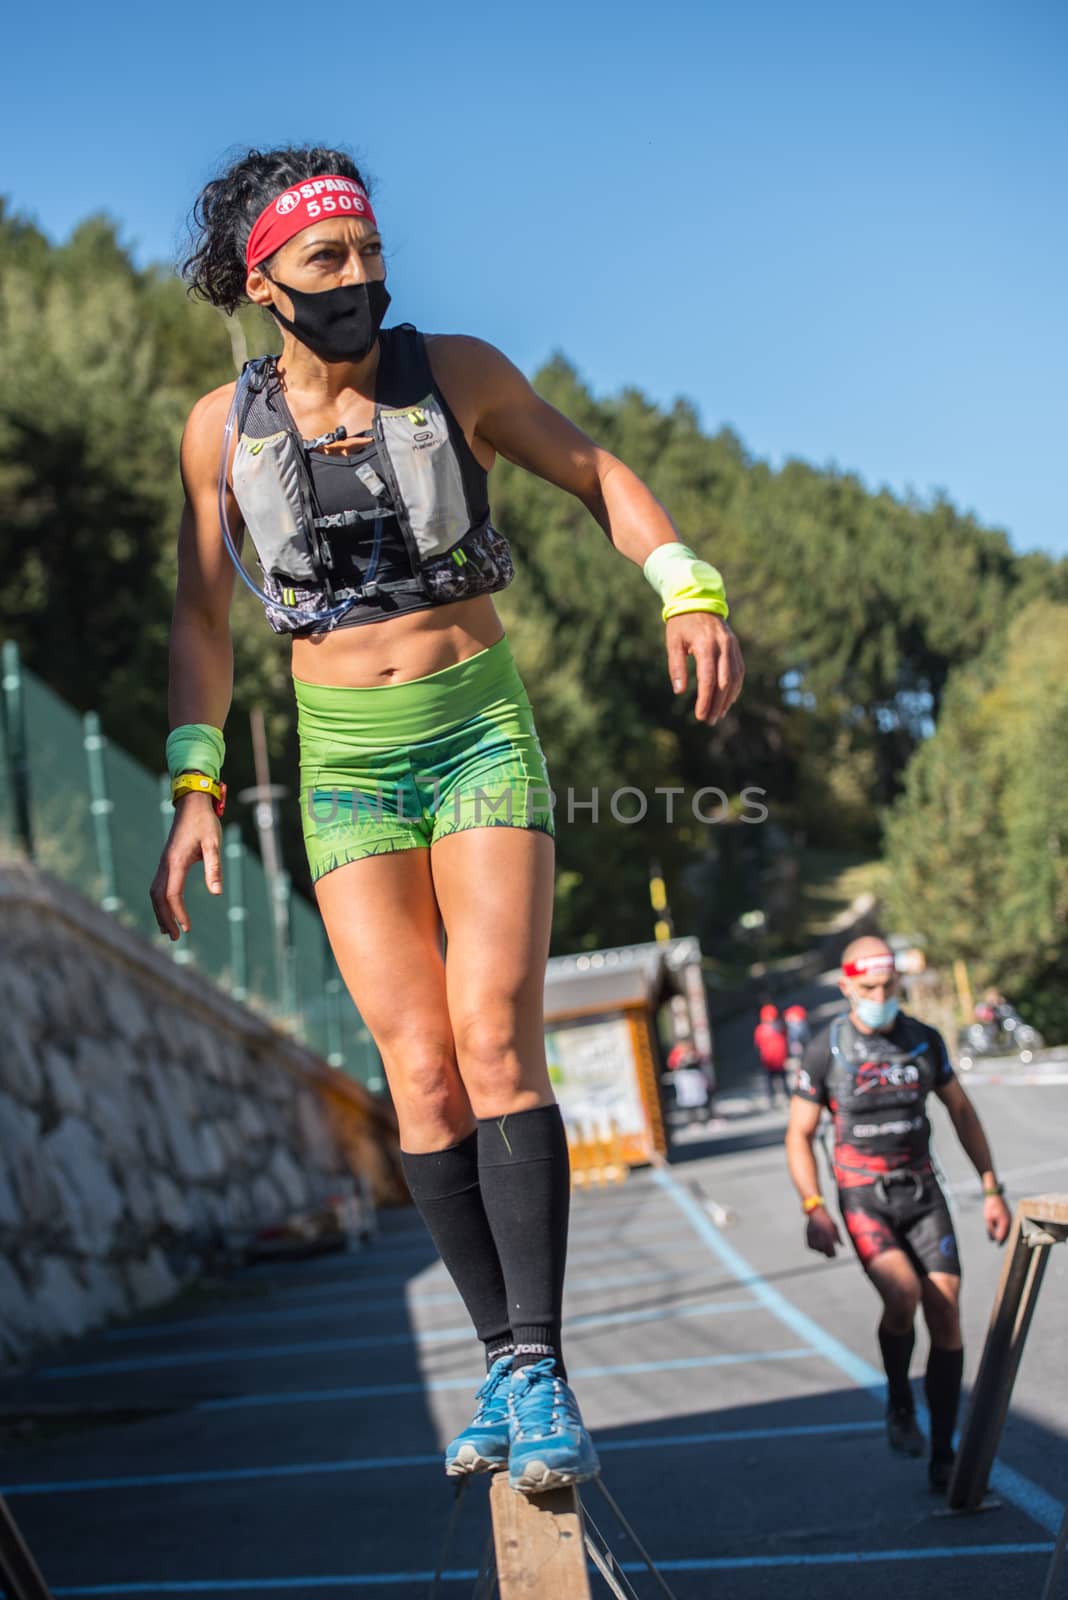 Encamp, Andorra : 2020 Sept 05 : Competitors participate in the 2020 Spartan Race obstacle racing challenge in Andorra, on september 05, 2020.